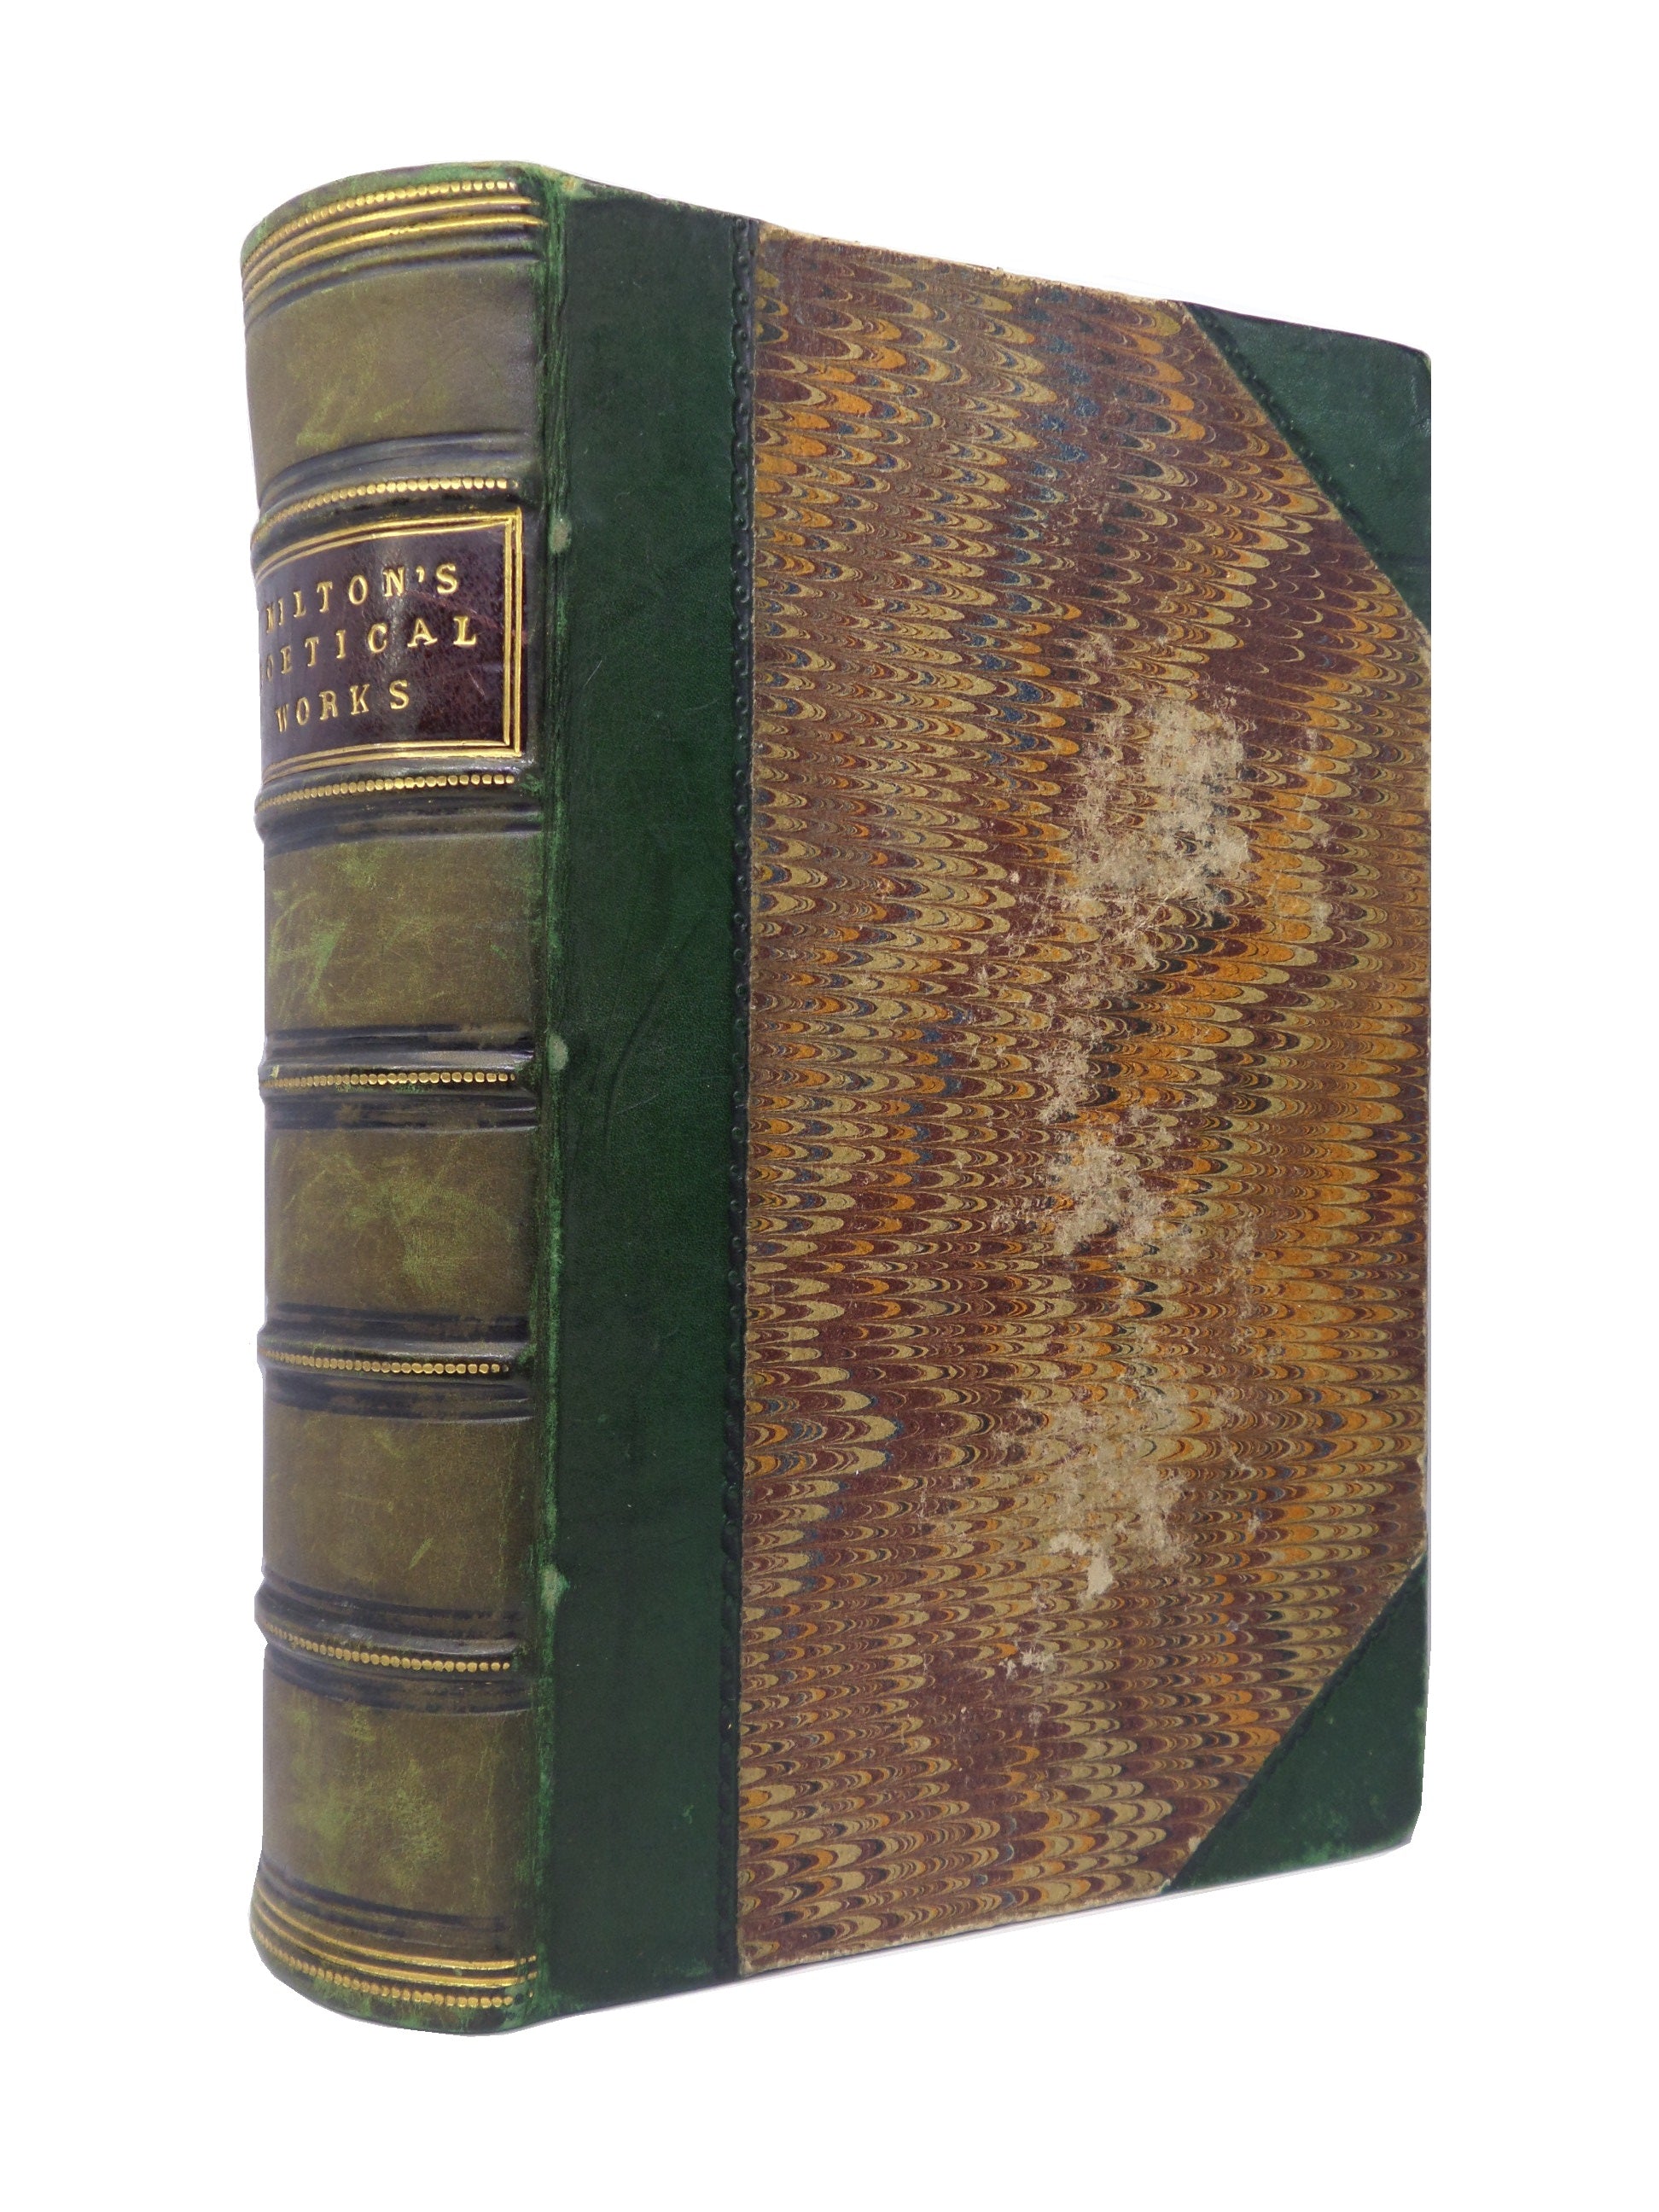 THE POETICAL WORKS OF JOHN MILTON CA.1840 LEATHER-BOUND